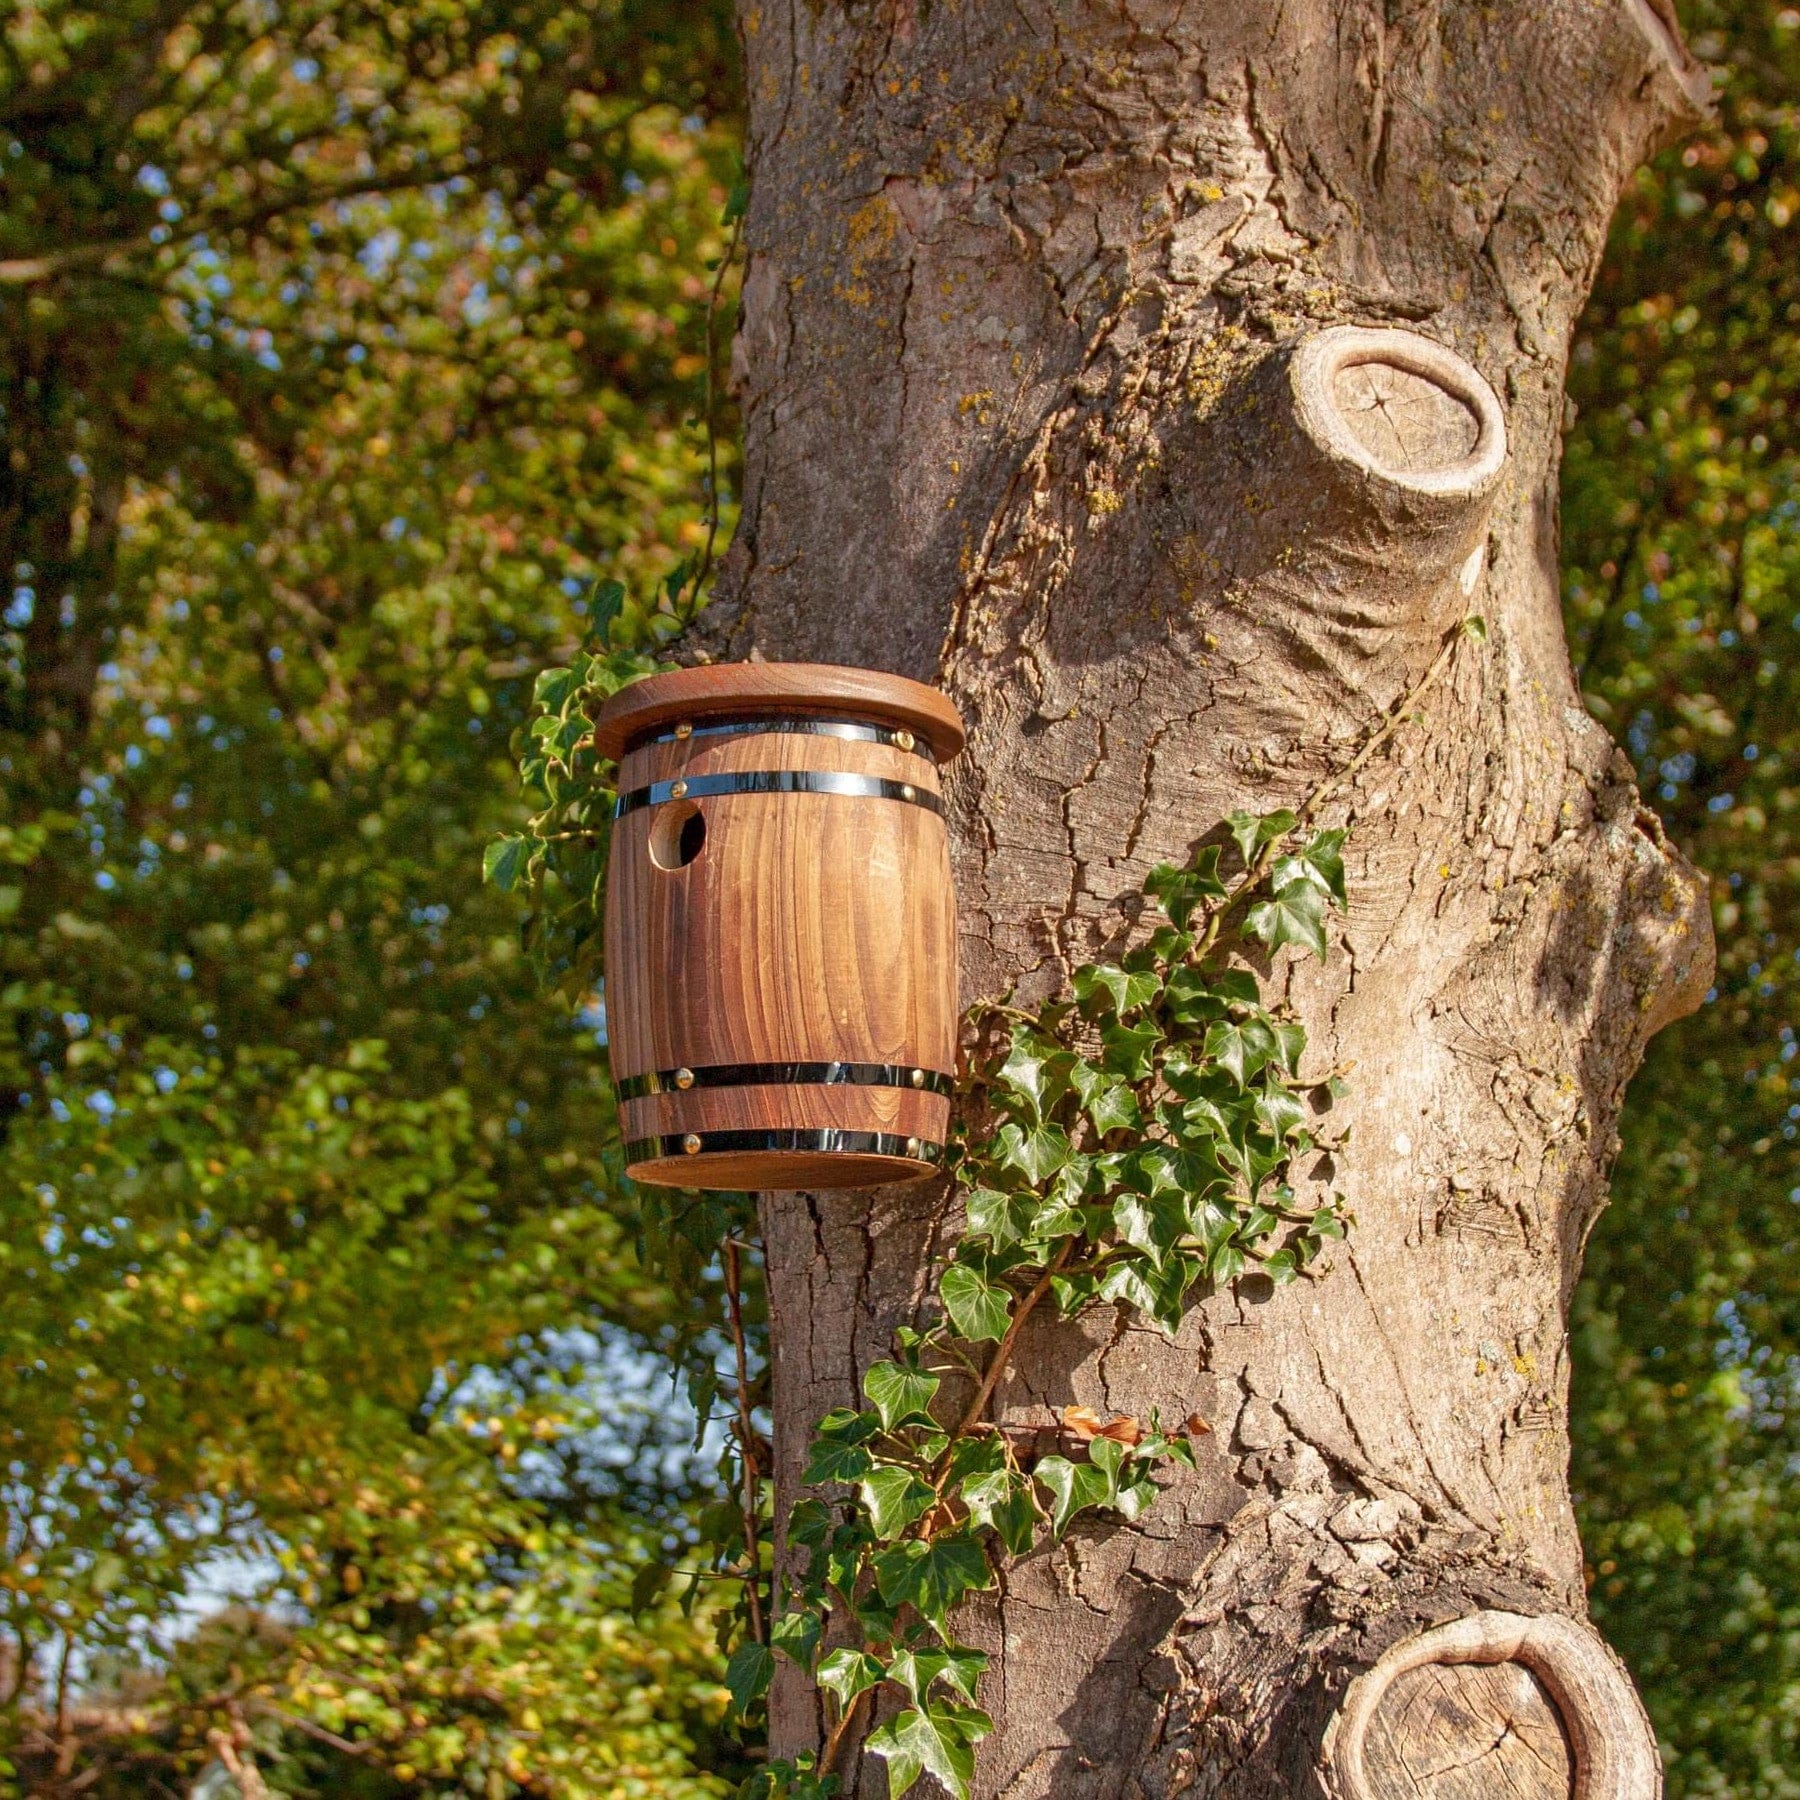 Wooden birdhouse attached to a tree trunk with ivy climbing up one side, set against a backdrop of green foliage and a clear blue sky.